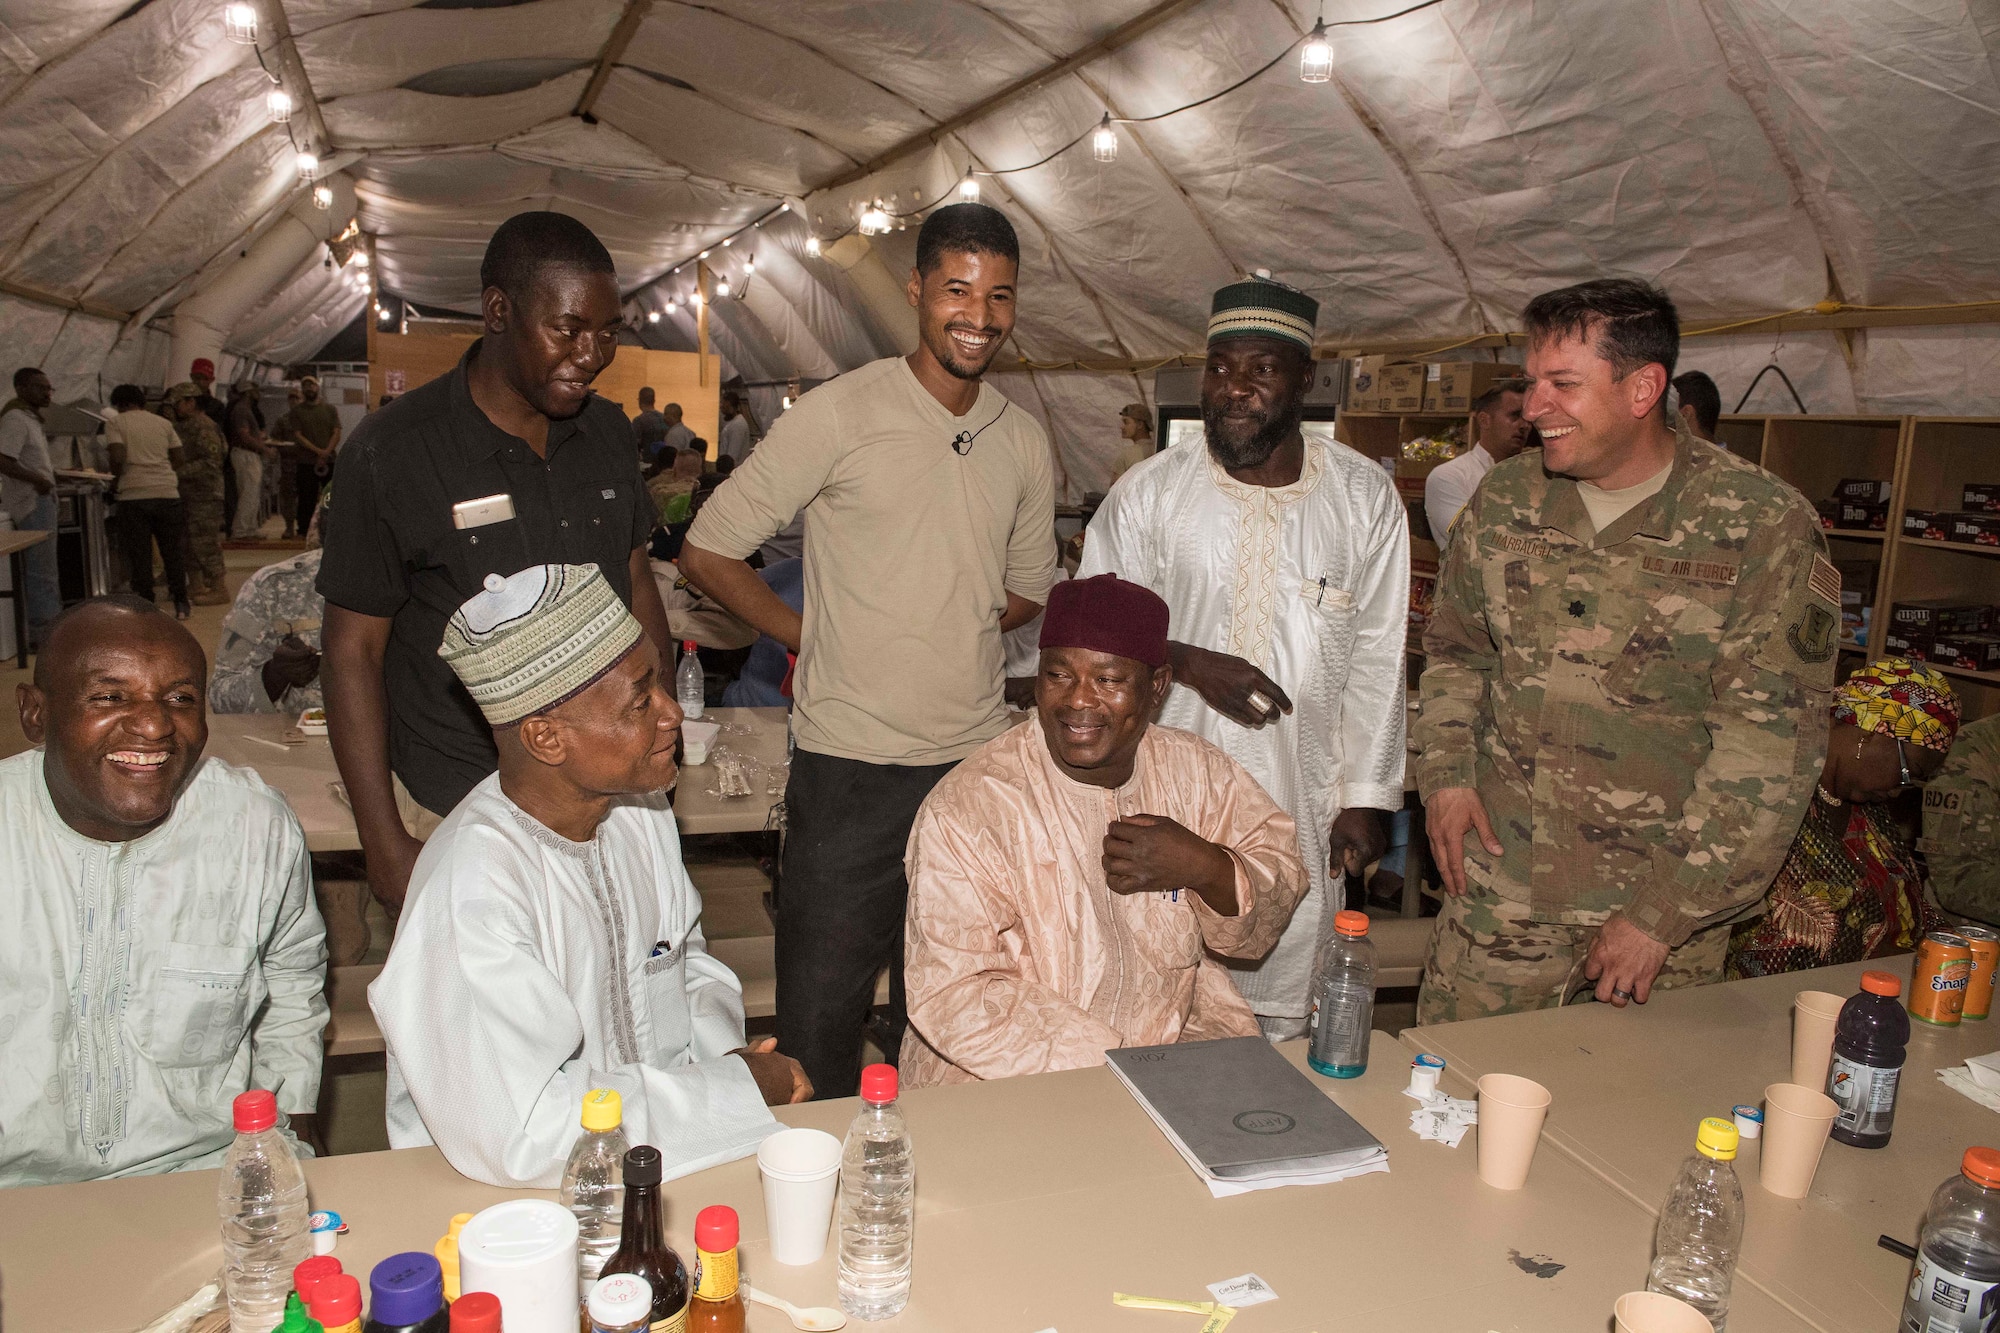 U.S. Air Force Lt. Col. Brad Harbaugh, 724th Expeditionary Air Base Squadron commander, laughs with members of the Forces Armées Nigeriennes and Agadez civic leaders during a social gathering at Nigerien Air Base 201’s dining facility, Feb. 21, 2018. The U.S. military is in Agadez at the request of the Government of Niger, and remains committed to helping its African partners protect their borders with matters of national security, and with other efforts important to the citizens of Niger. (U.S. Air Force photo by Tech. Sgt. Nick Wilson)